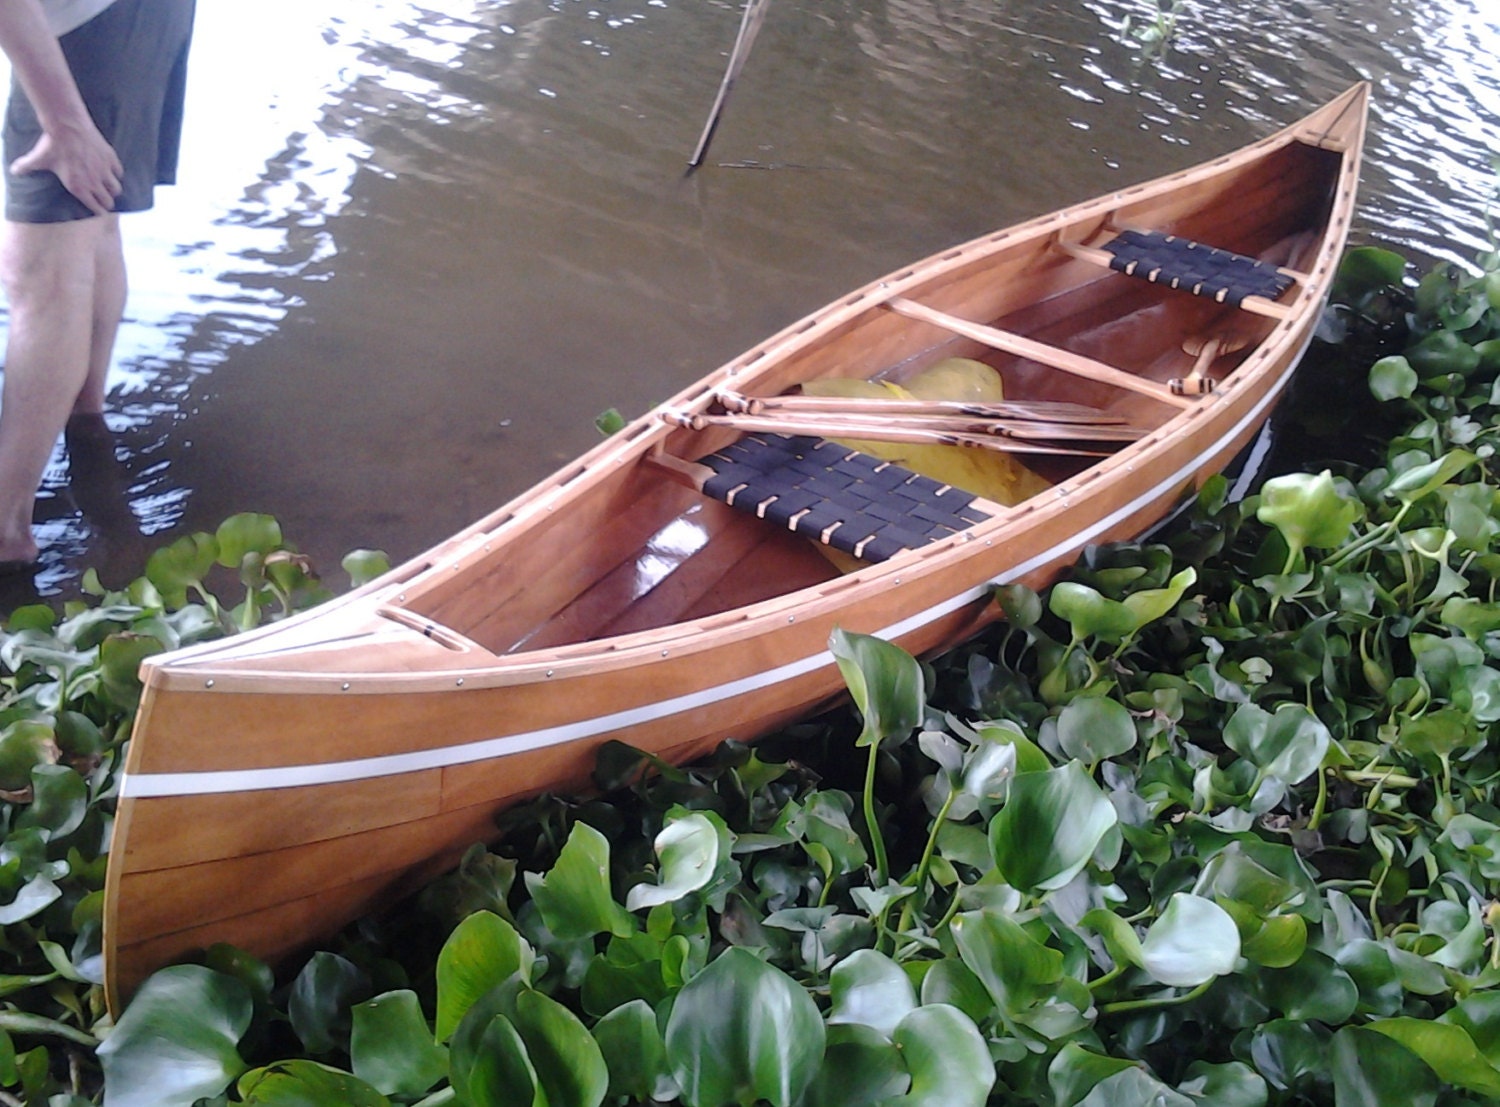 Wooden lapstrake canoe handcrafted from plywood and ash. Enforced by 